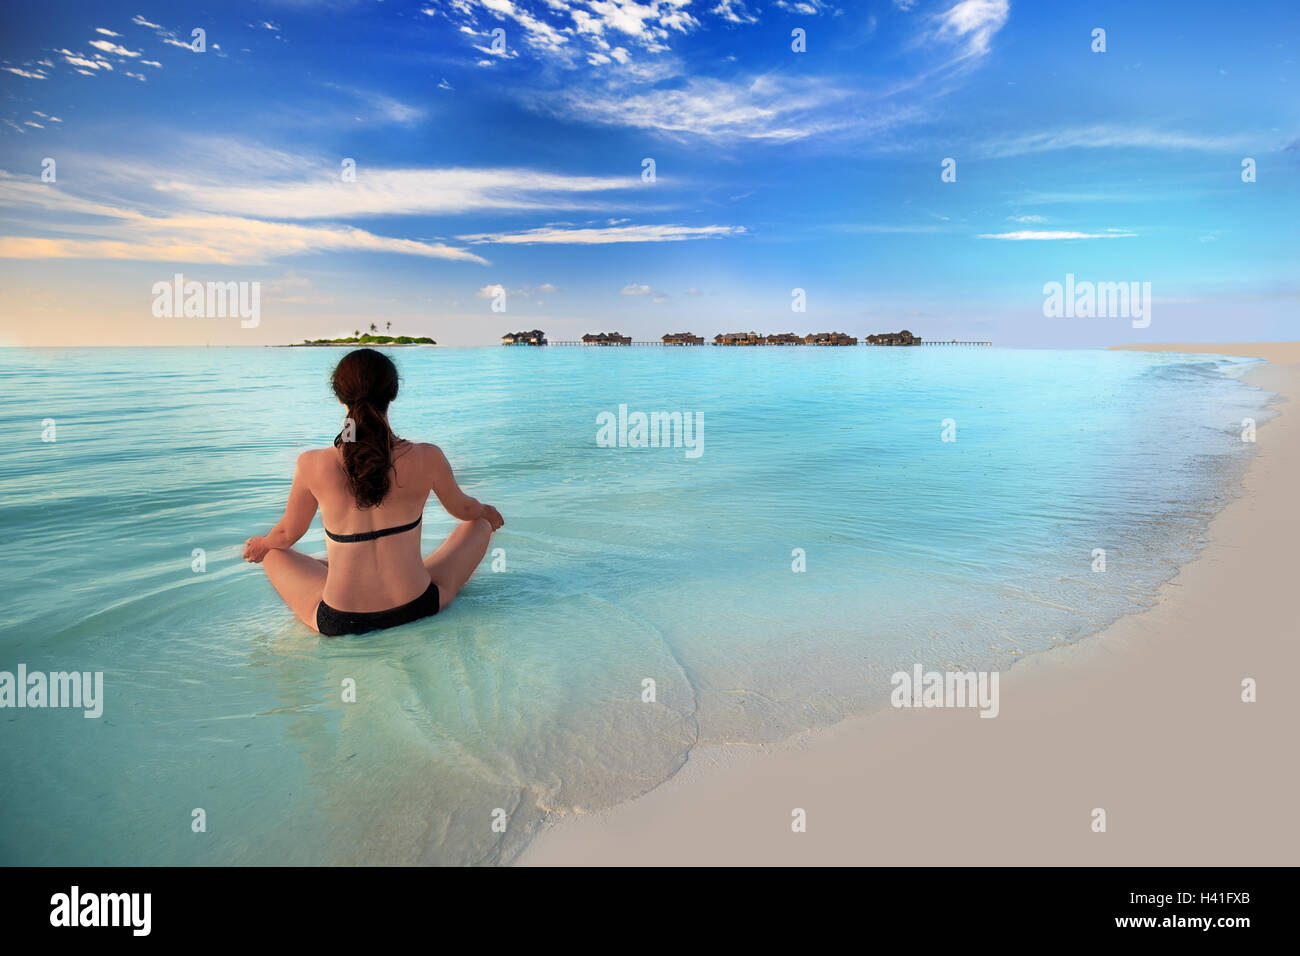 Young woman exercising yoga in turquoise lagoon with overwater bungalows on tropical island Stock Photo